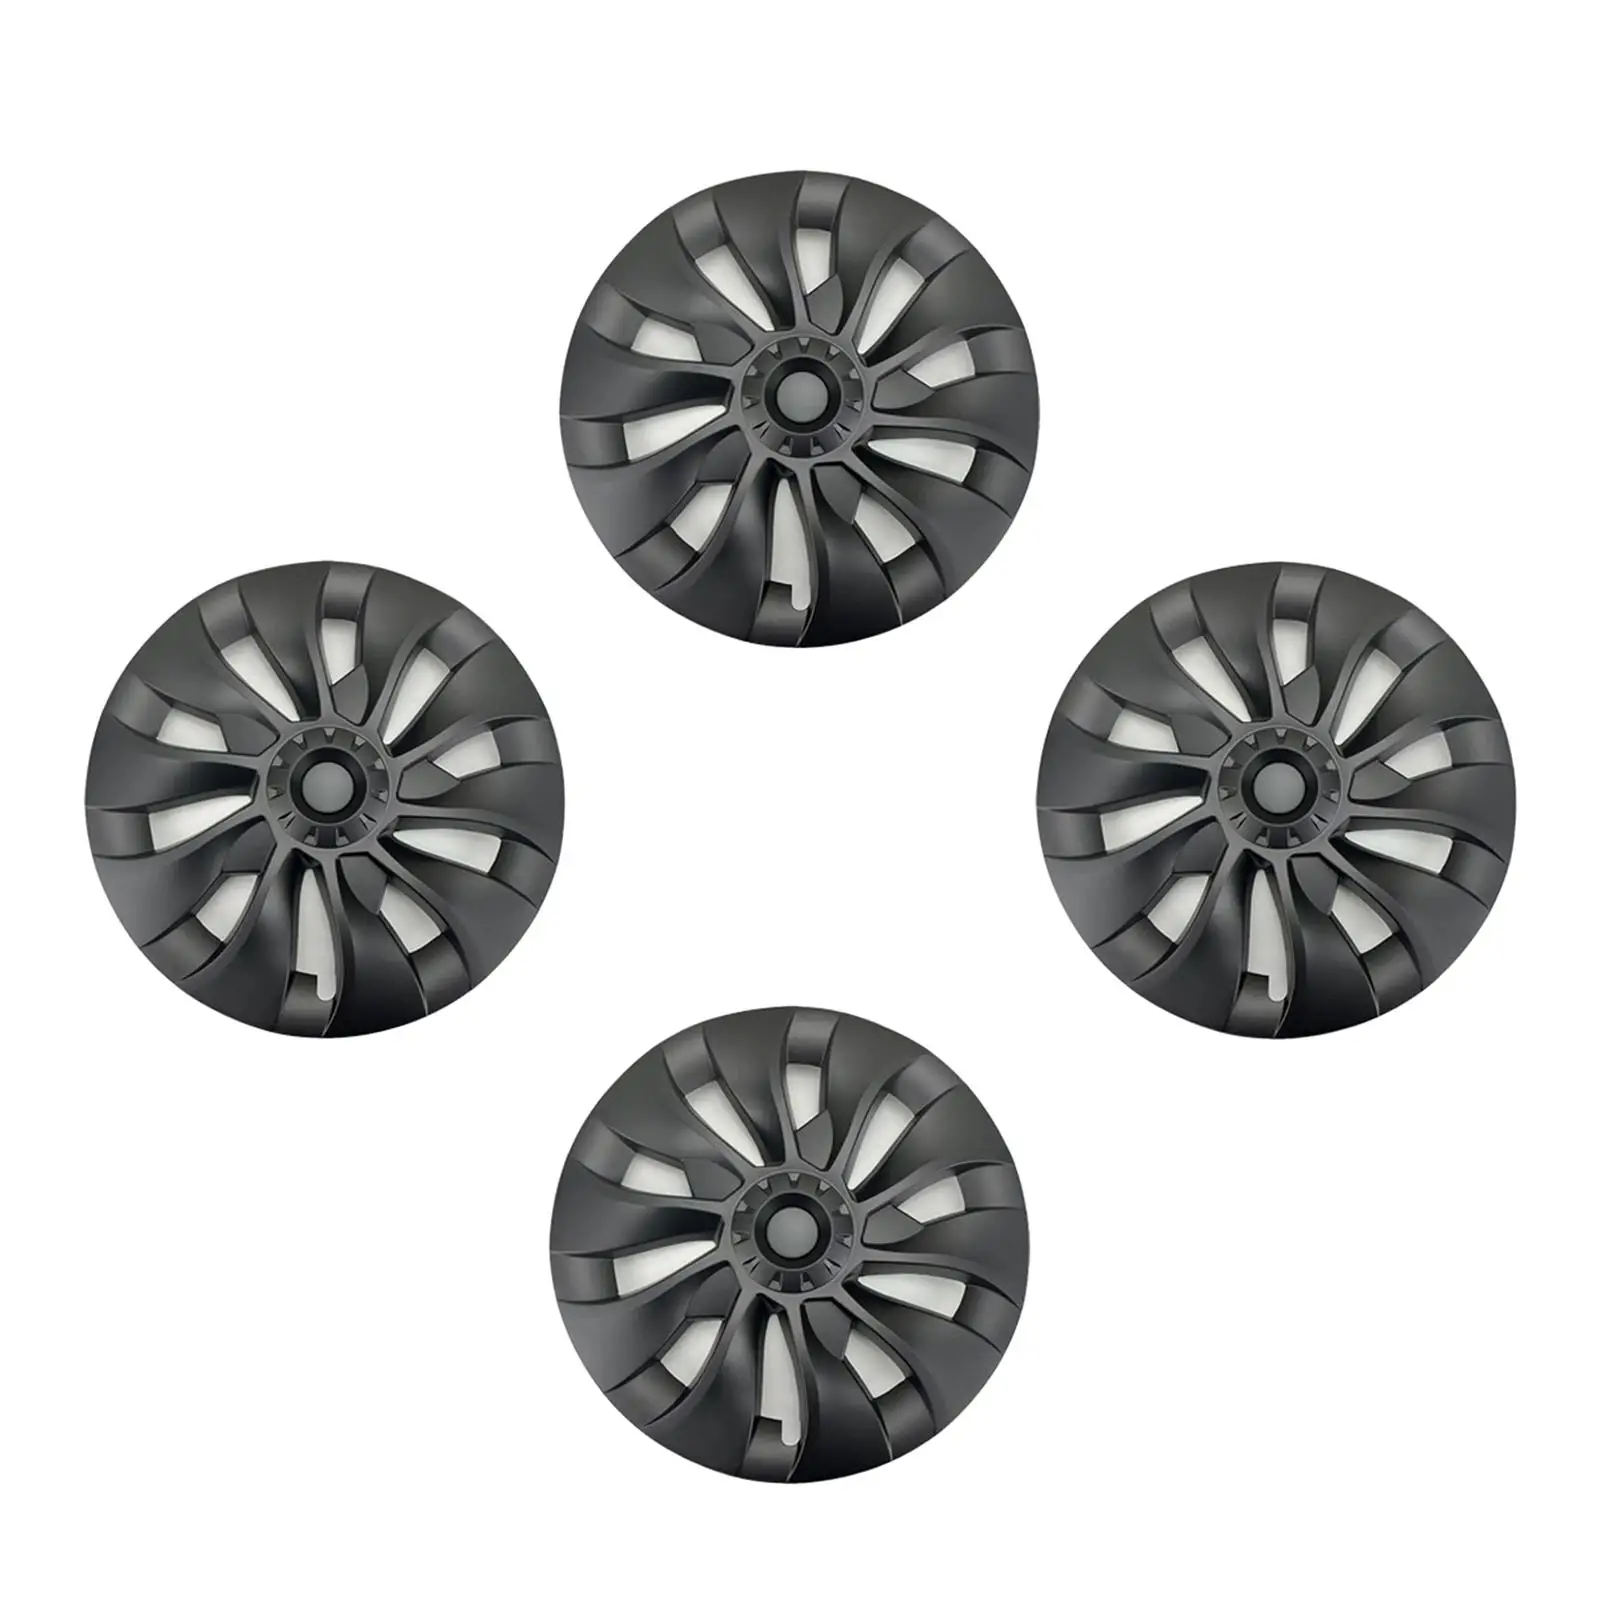 4x 18 inch Hub Cap Replace Parts Automobile Wheel Cover High Quality Hubcap Full Rim Cover for Tesla Model 3